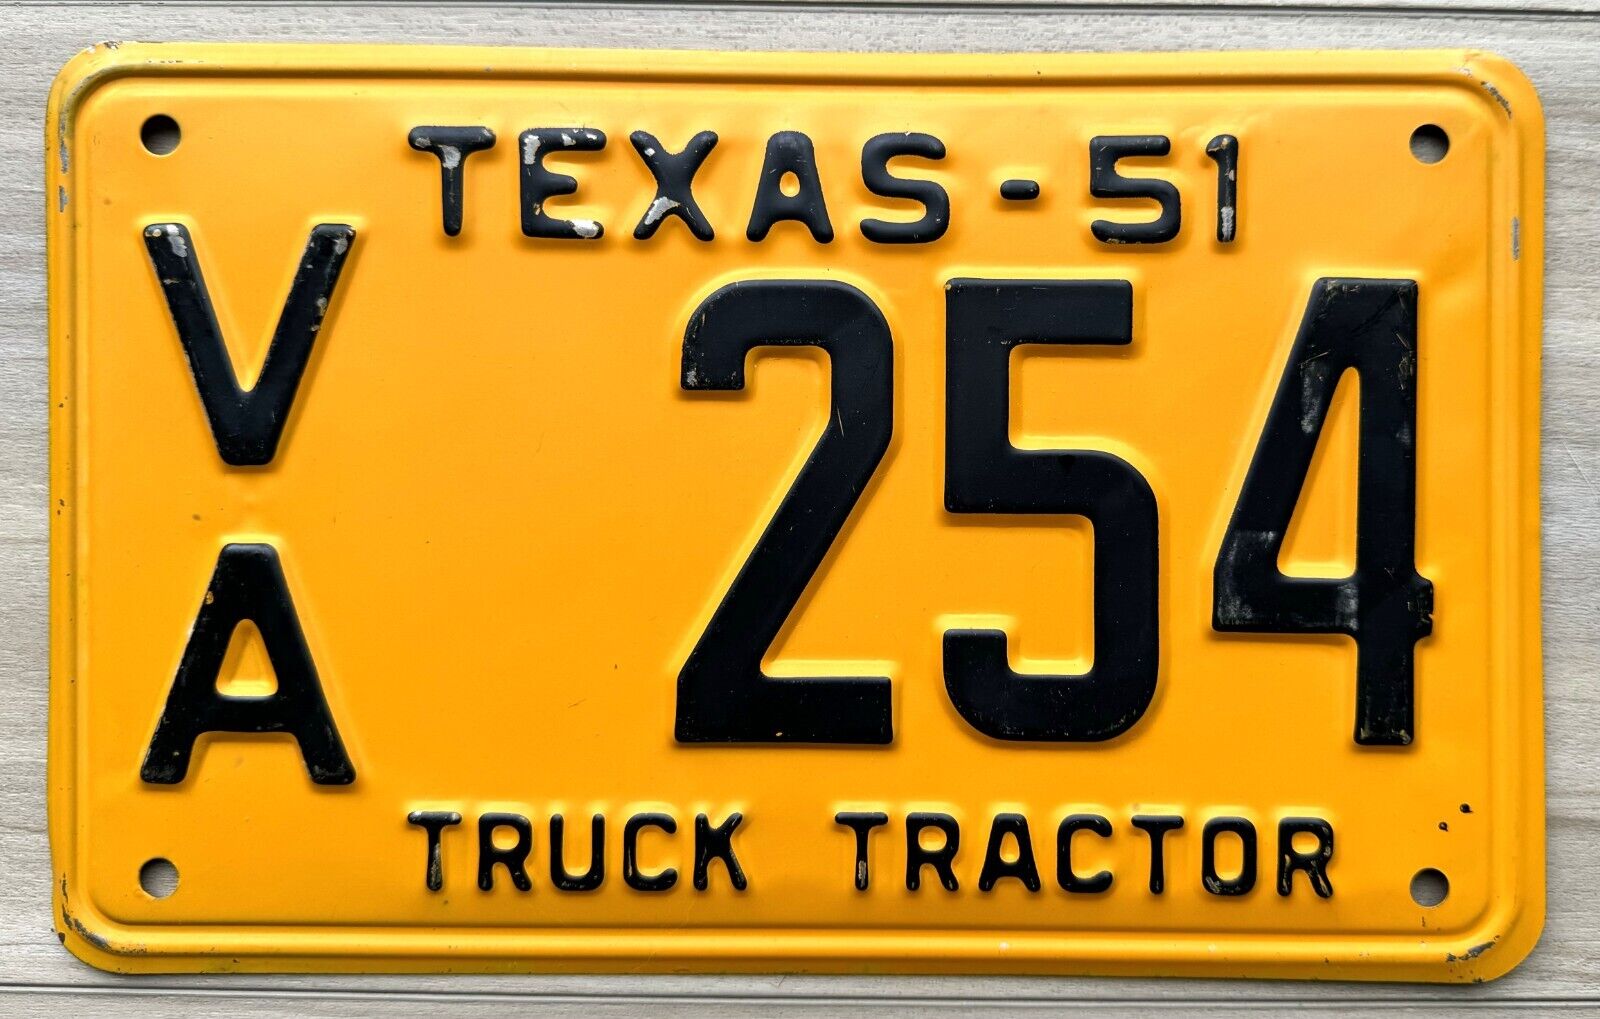 1951 Texas Truck Tractor License Plate - Very Nice Original Paint